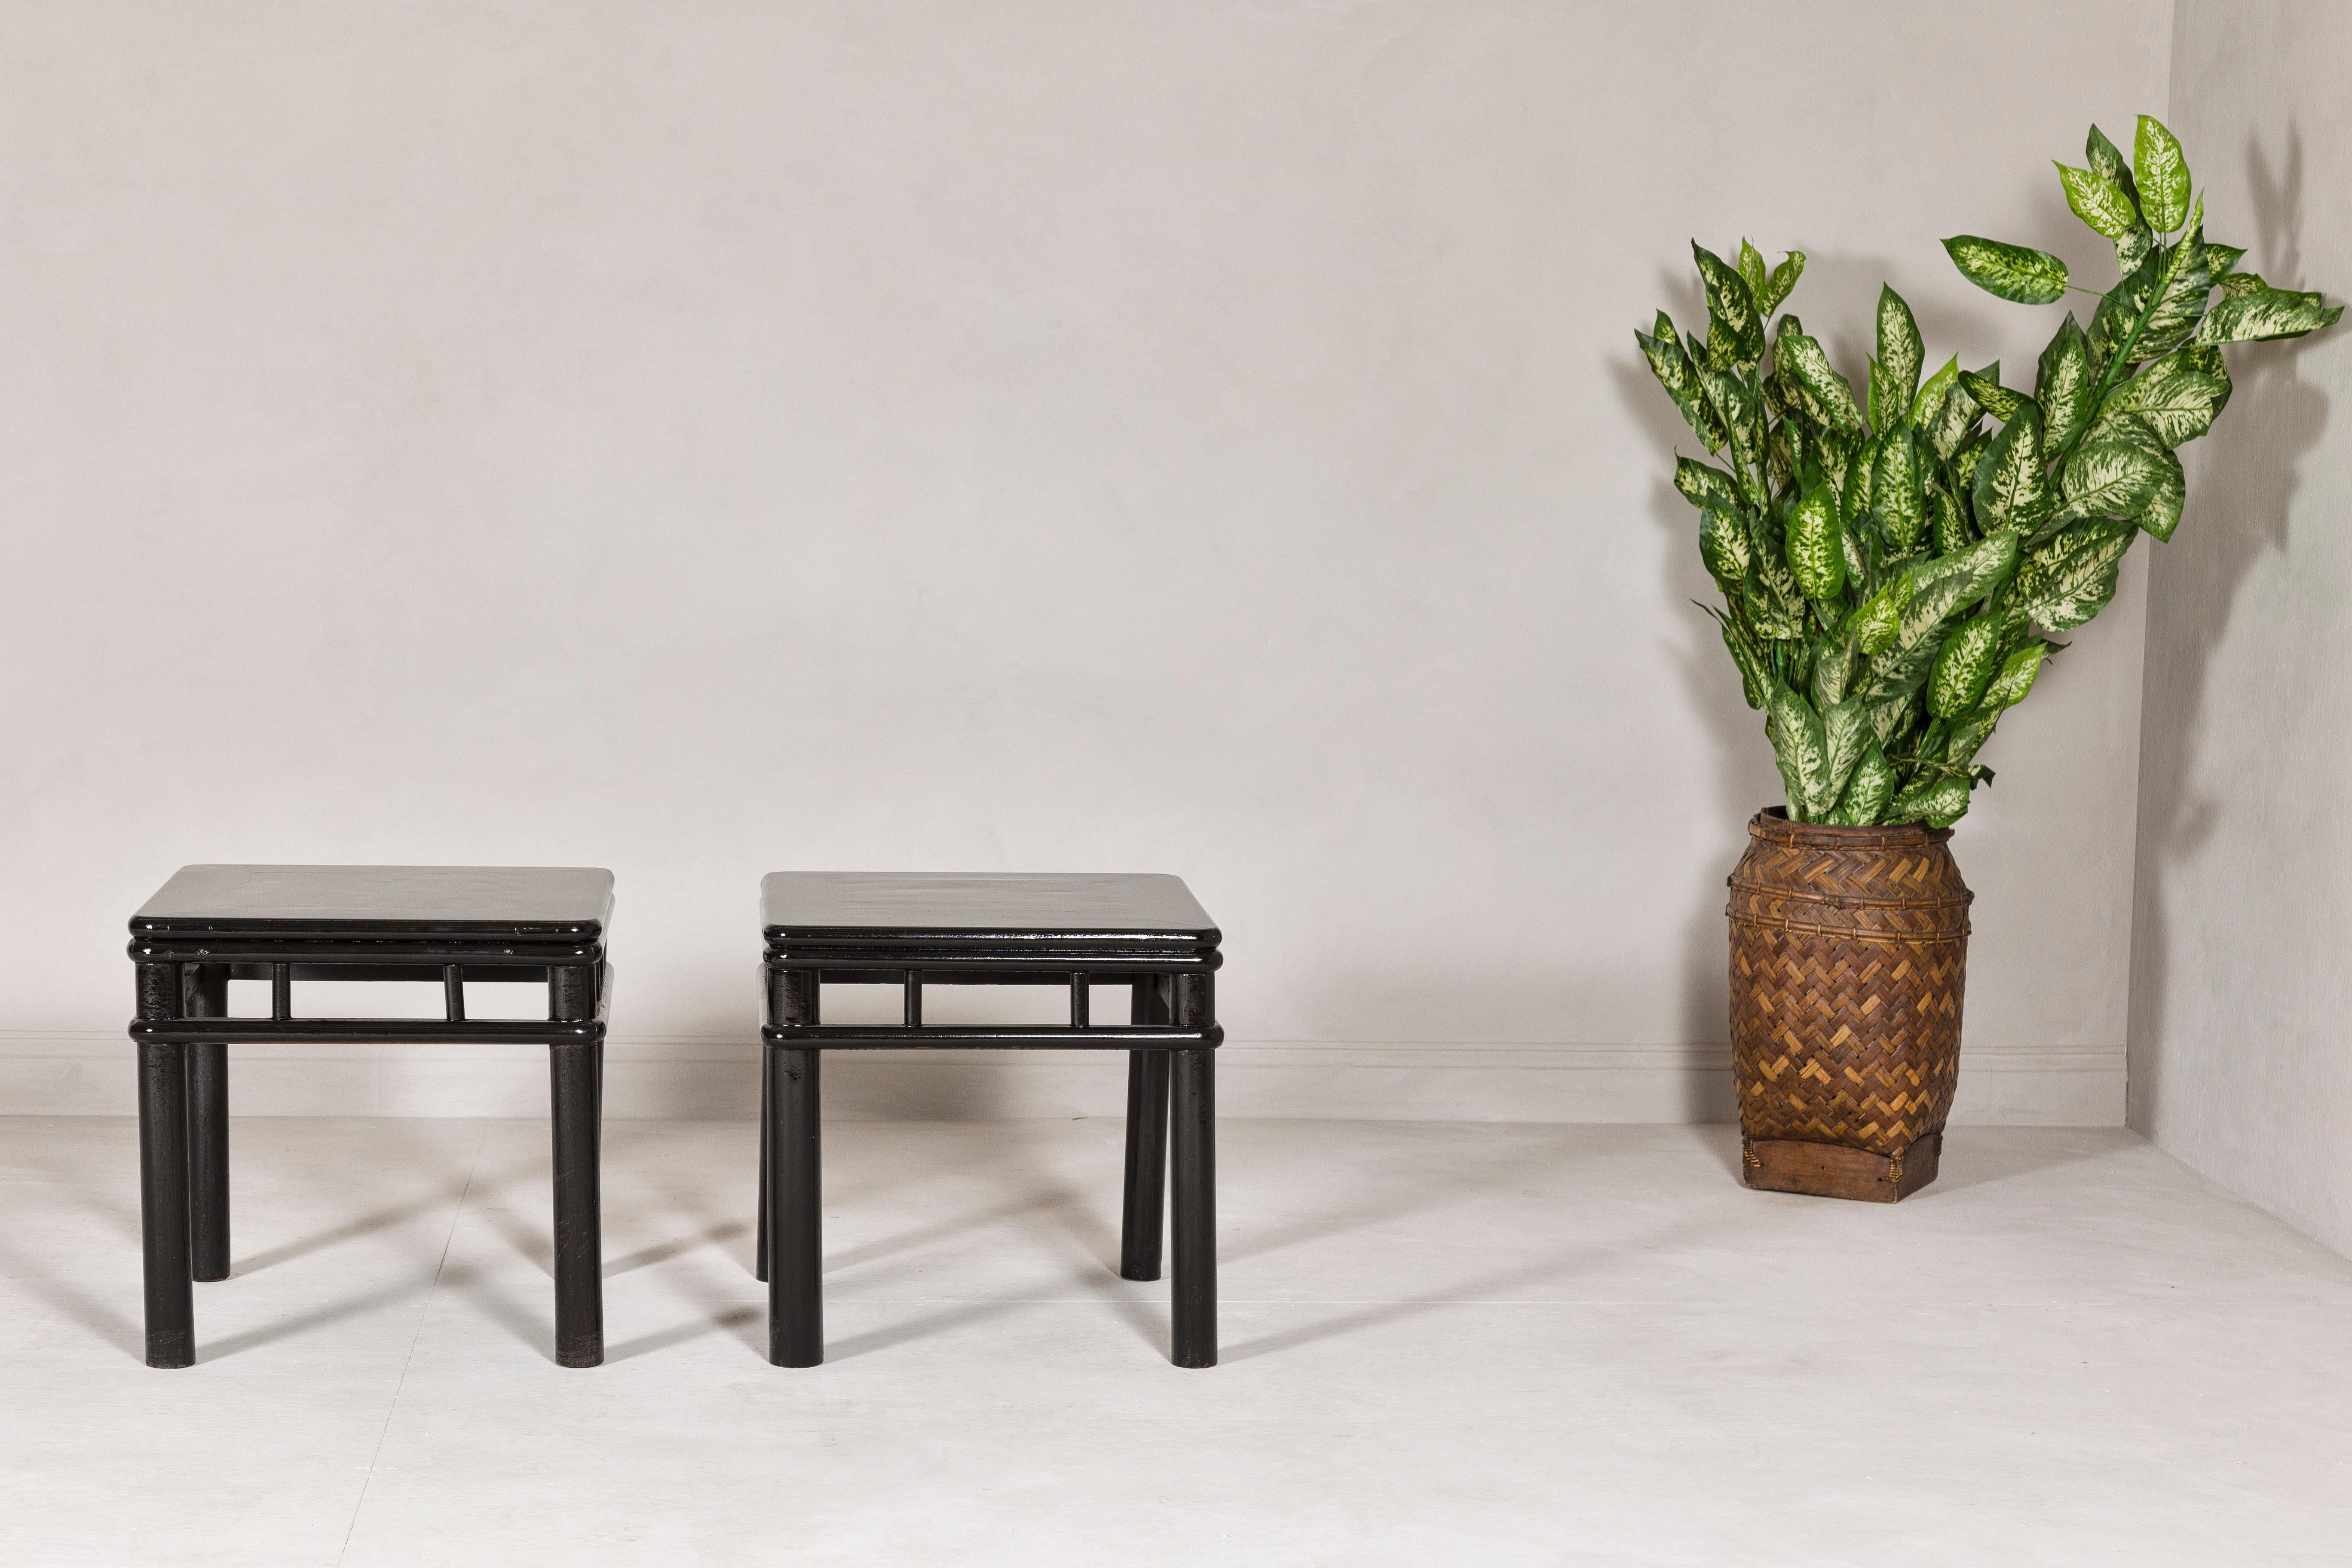 A pair of late Qing Dynasty period black lacquer drinks table from the early 20th century with open stretchers and cylindrical legs. Step into the world of Chinese elegance and history with this pair of late Qing Dynasty black lacquer drinks tables